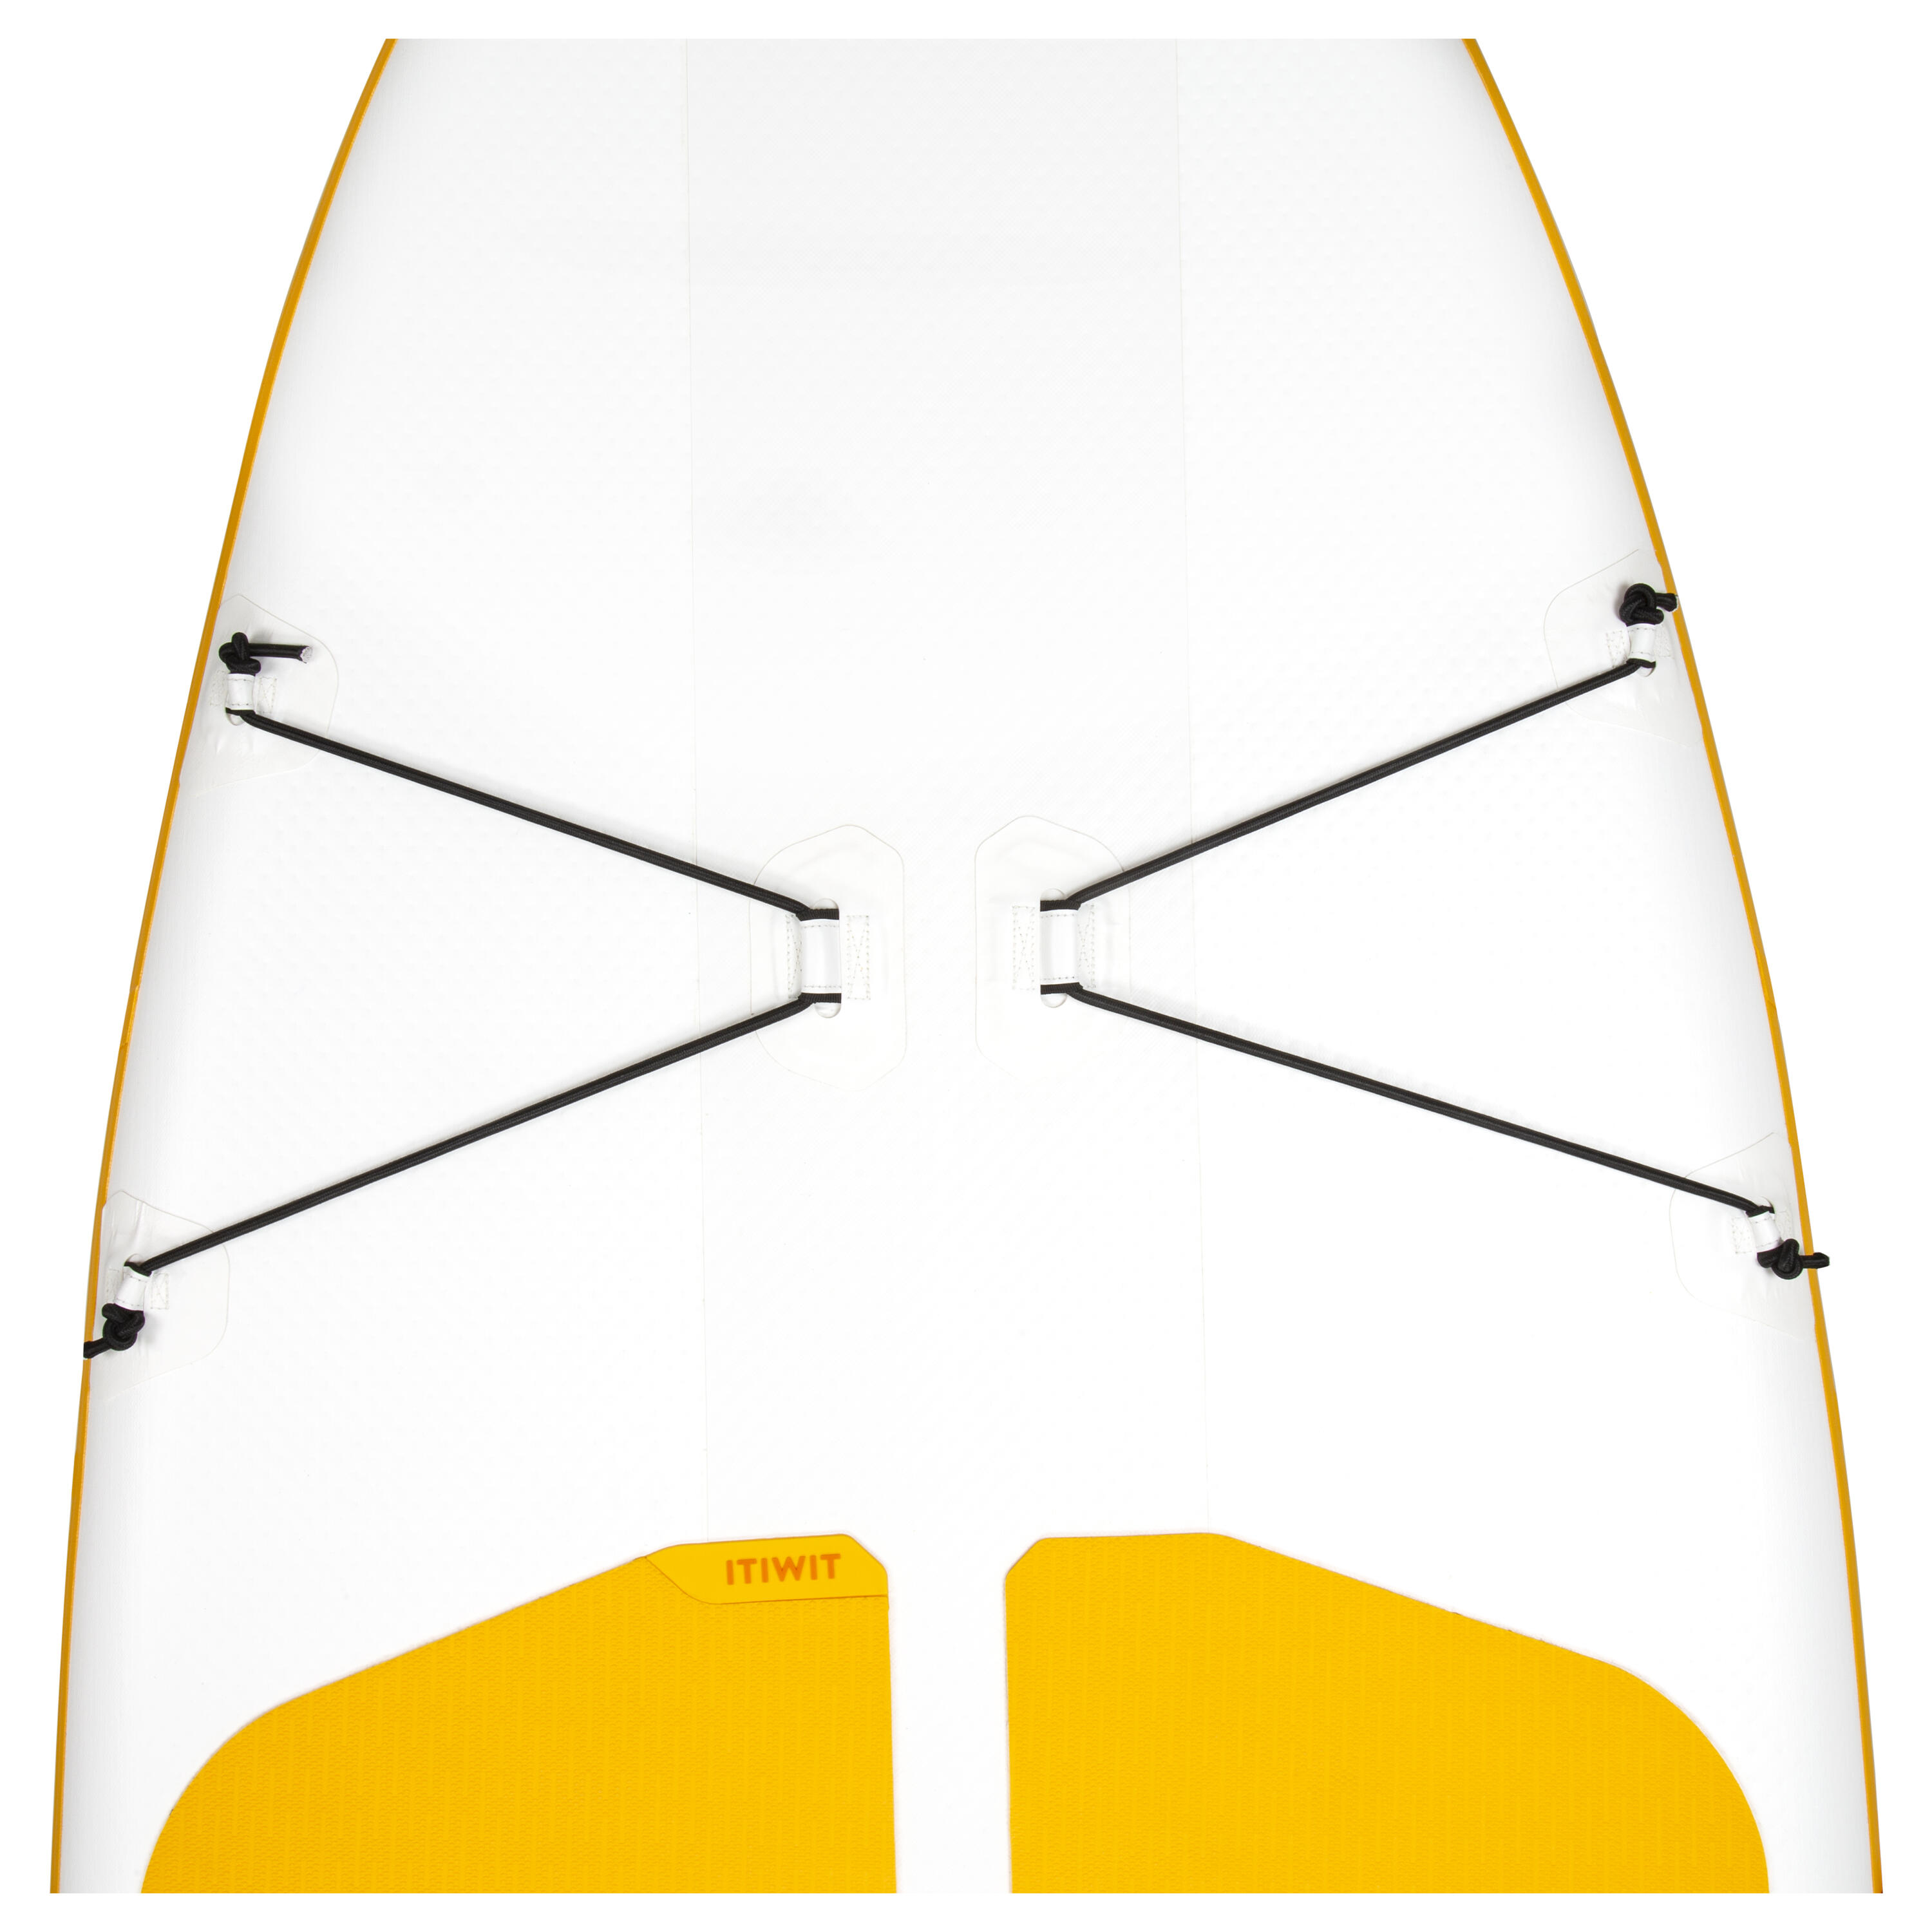 100 COMPACT 8FT (S) INFLATABLE STAND-UP PADDLEBOARD - YELLOW/WHITE (up to 60kg) 12/29